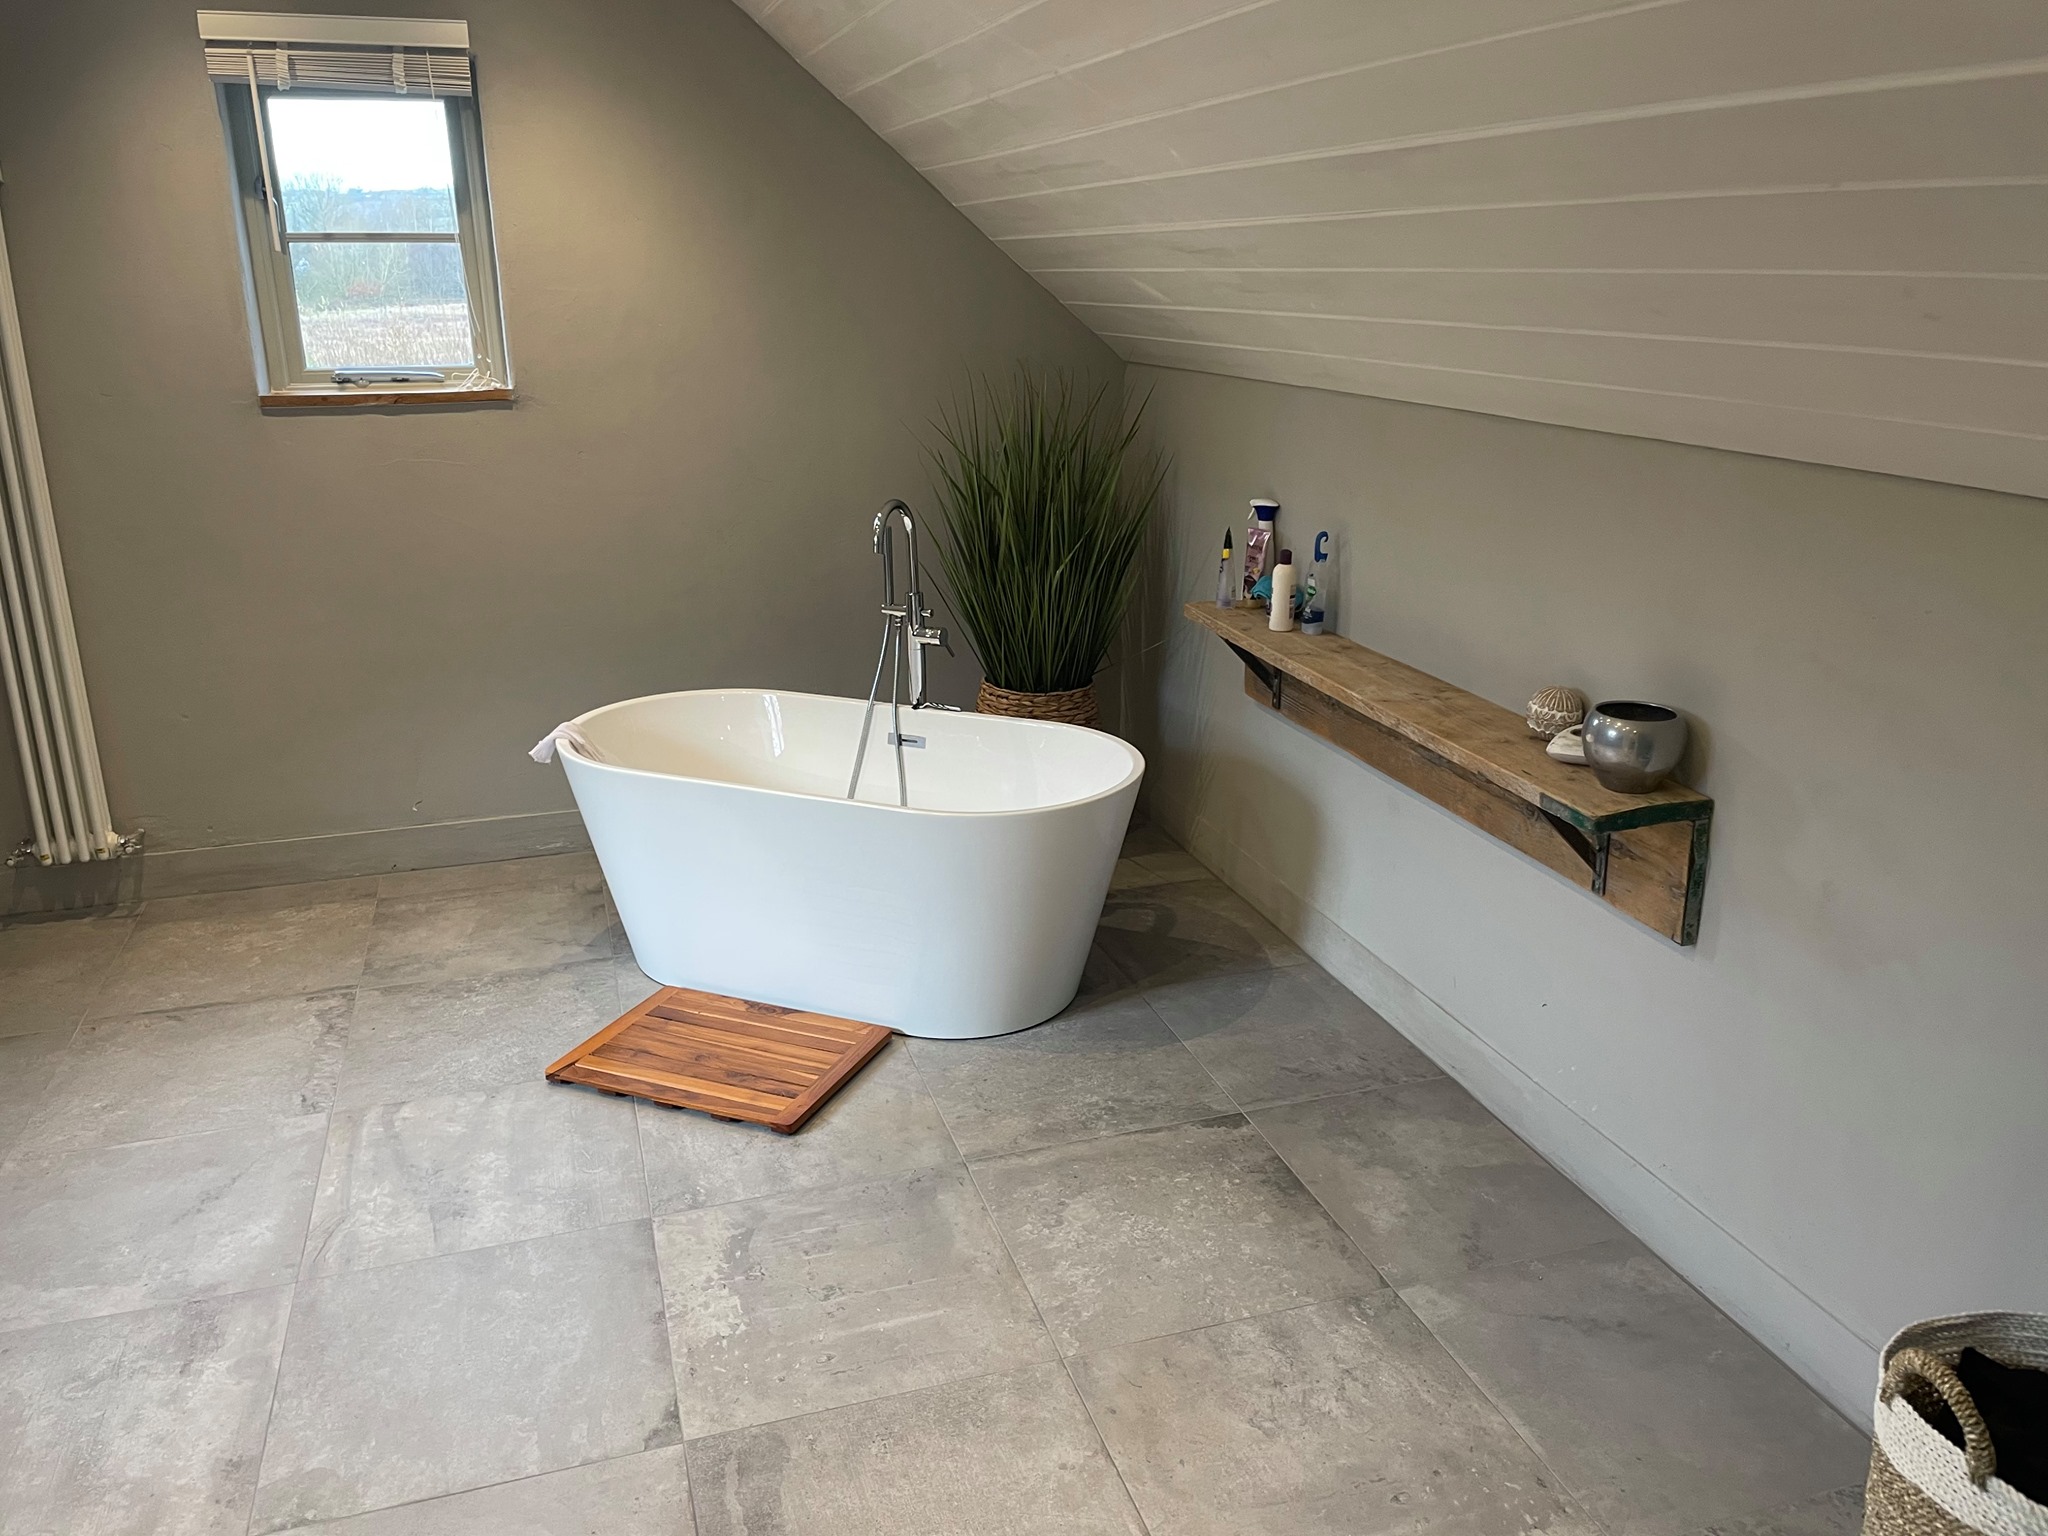 Bathroom tiling & panelling specialists